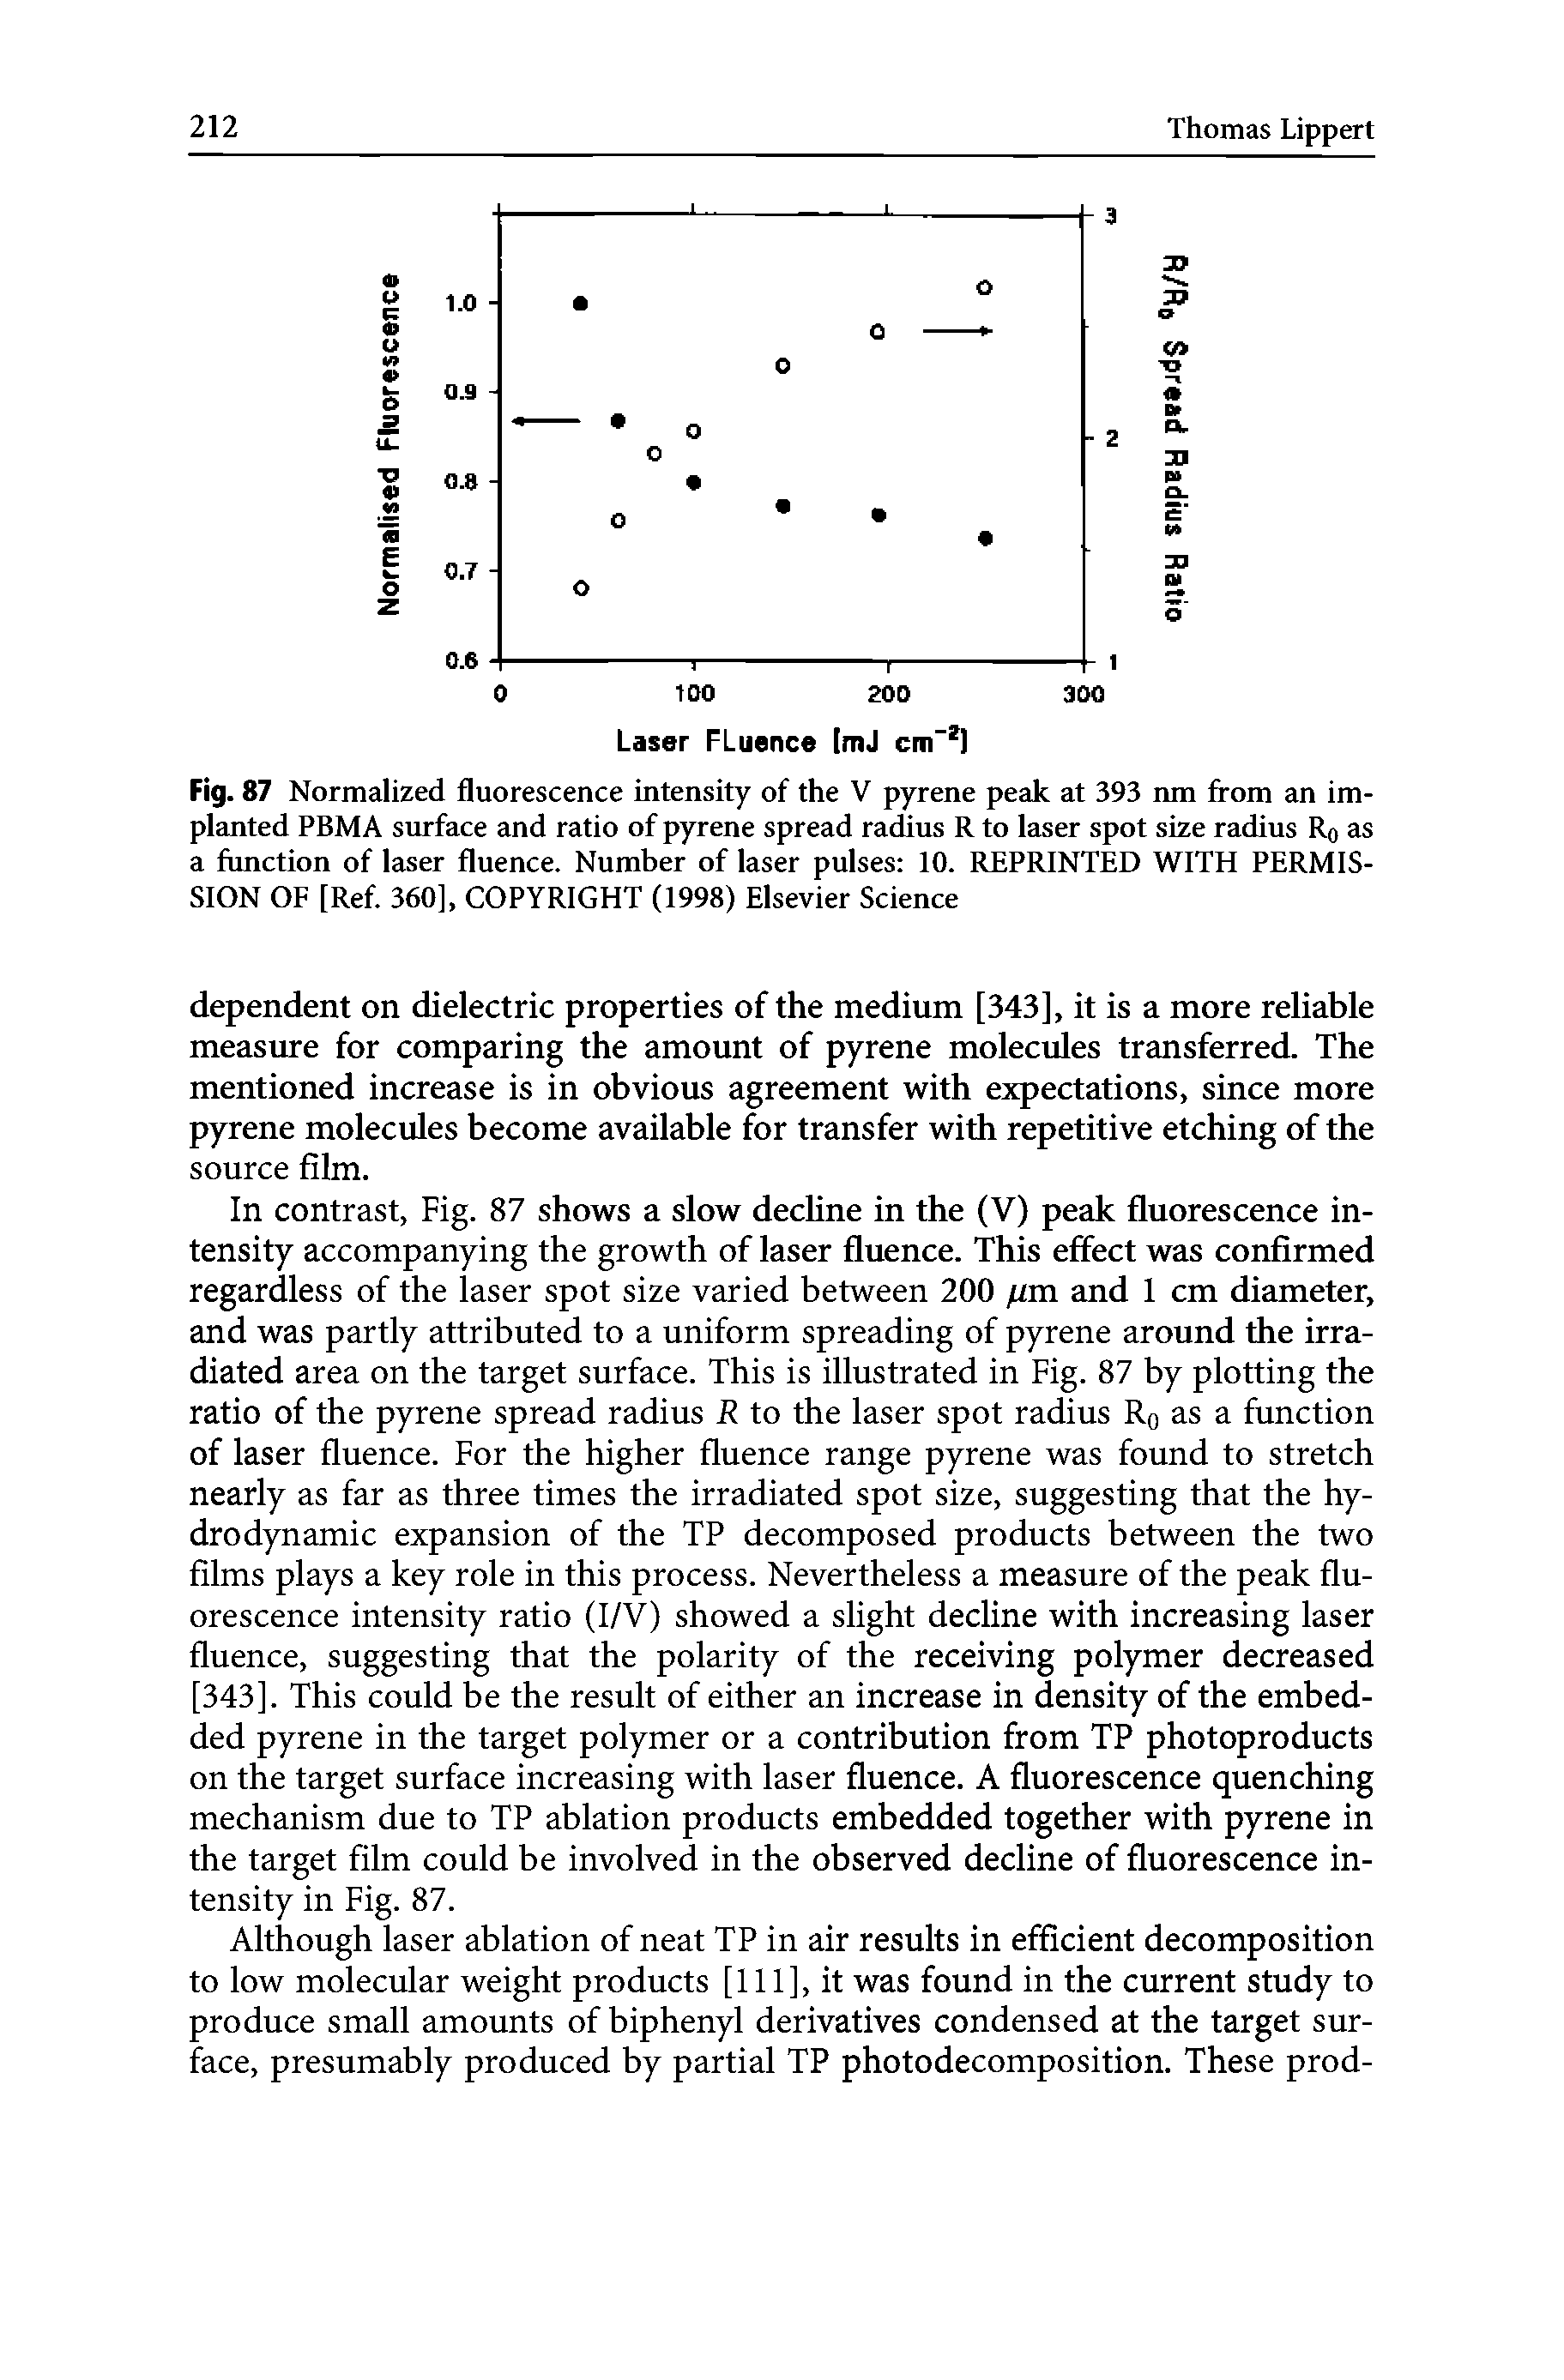 Fig. 87 Normalized fluorescence intensity of the V pyrene peak at 393 nm from an implanted PBMA surface and ratio of pyrene spread radius R to laser spot size radius R0 as a function of laser fluence. Number of laser pulses 10. REPRINTED WITH PERMISSION OF [Ref. 360], COPYRIGHT (1998) Elsevier Science...